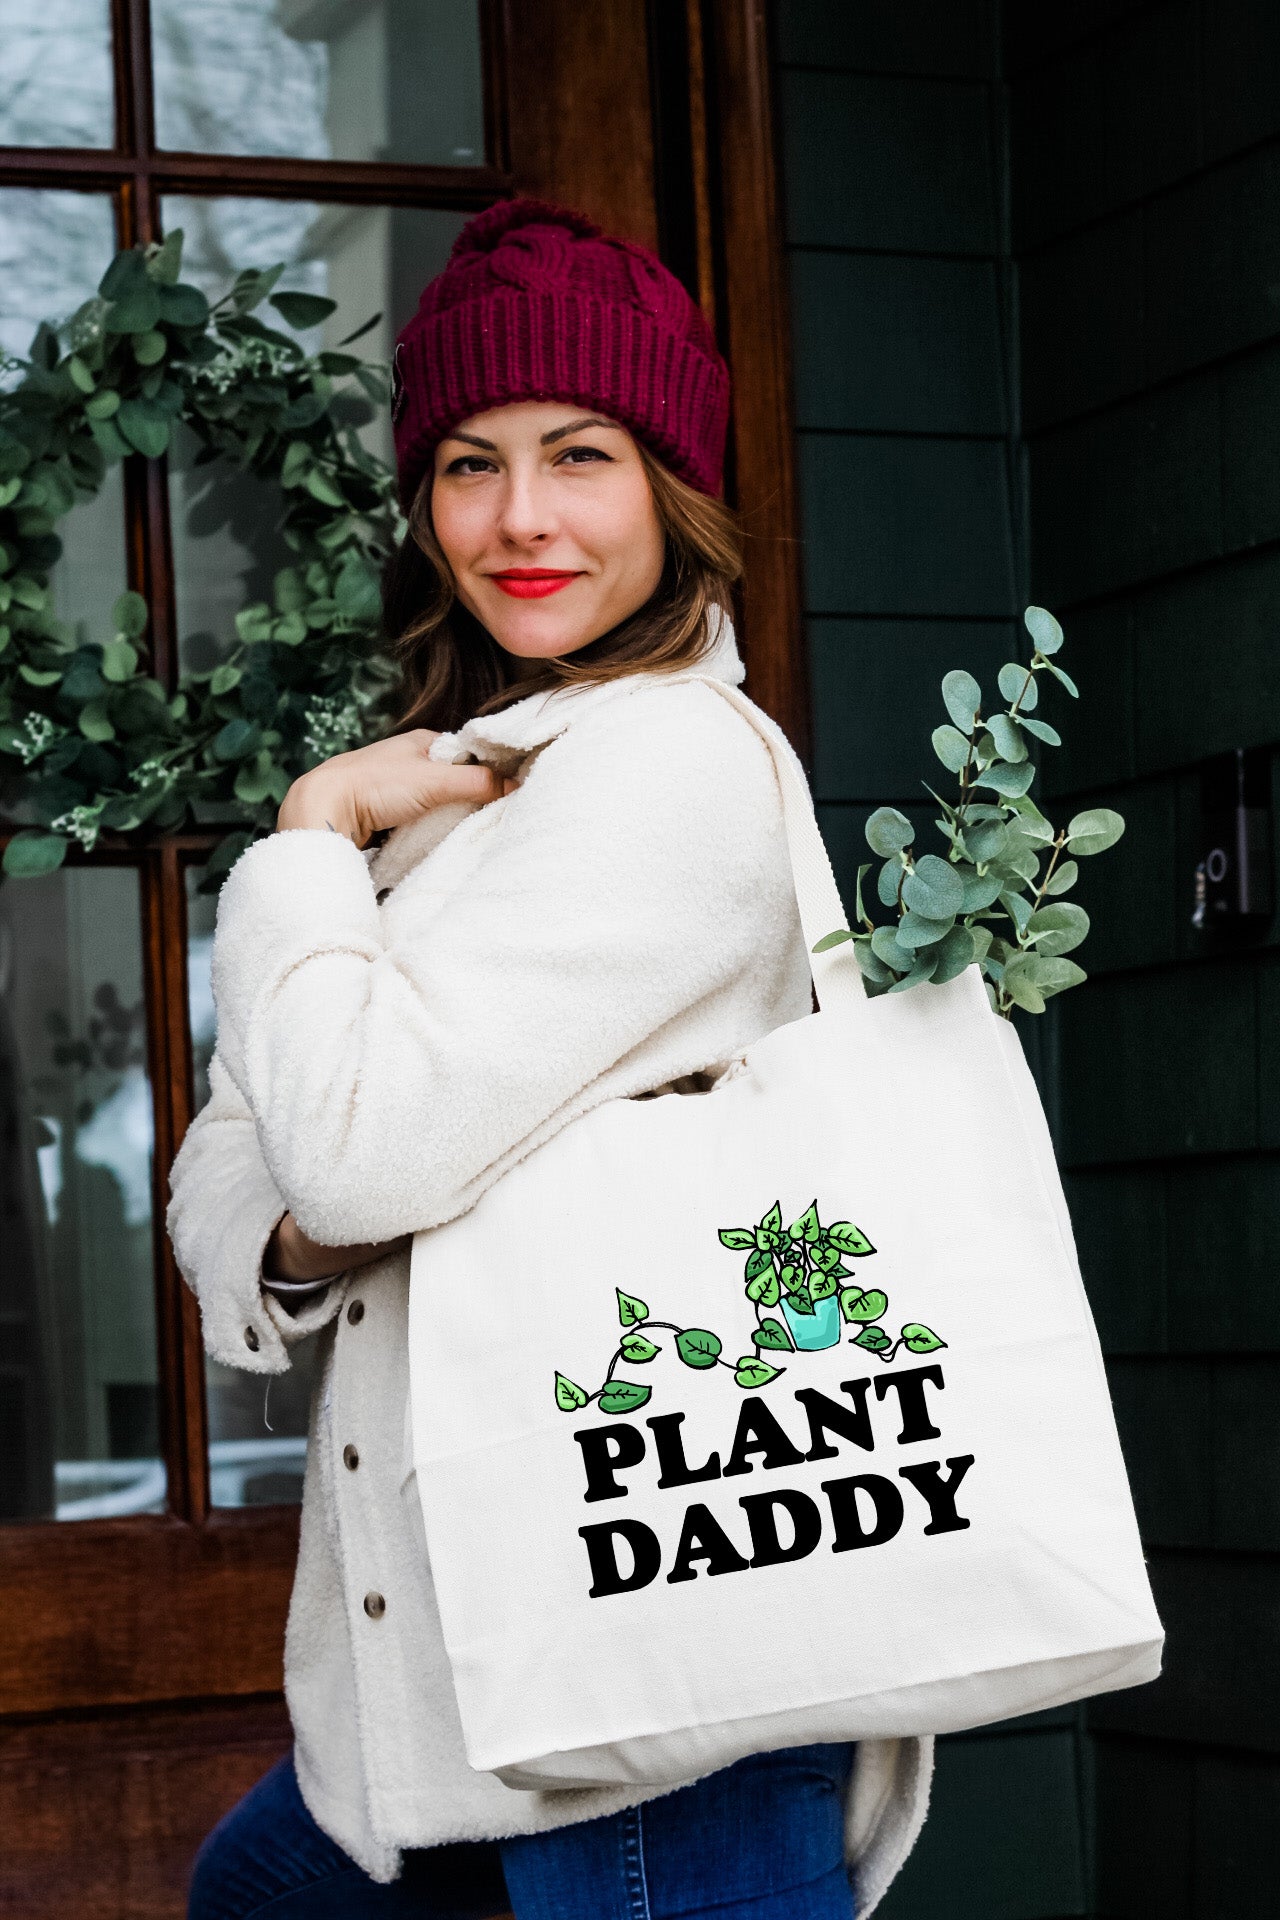 a woman carrying a bag that says plant daddy